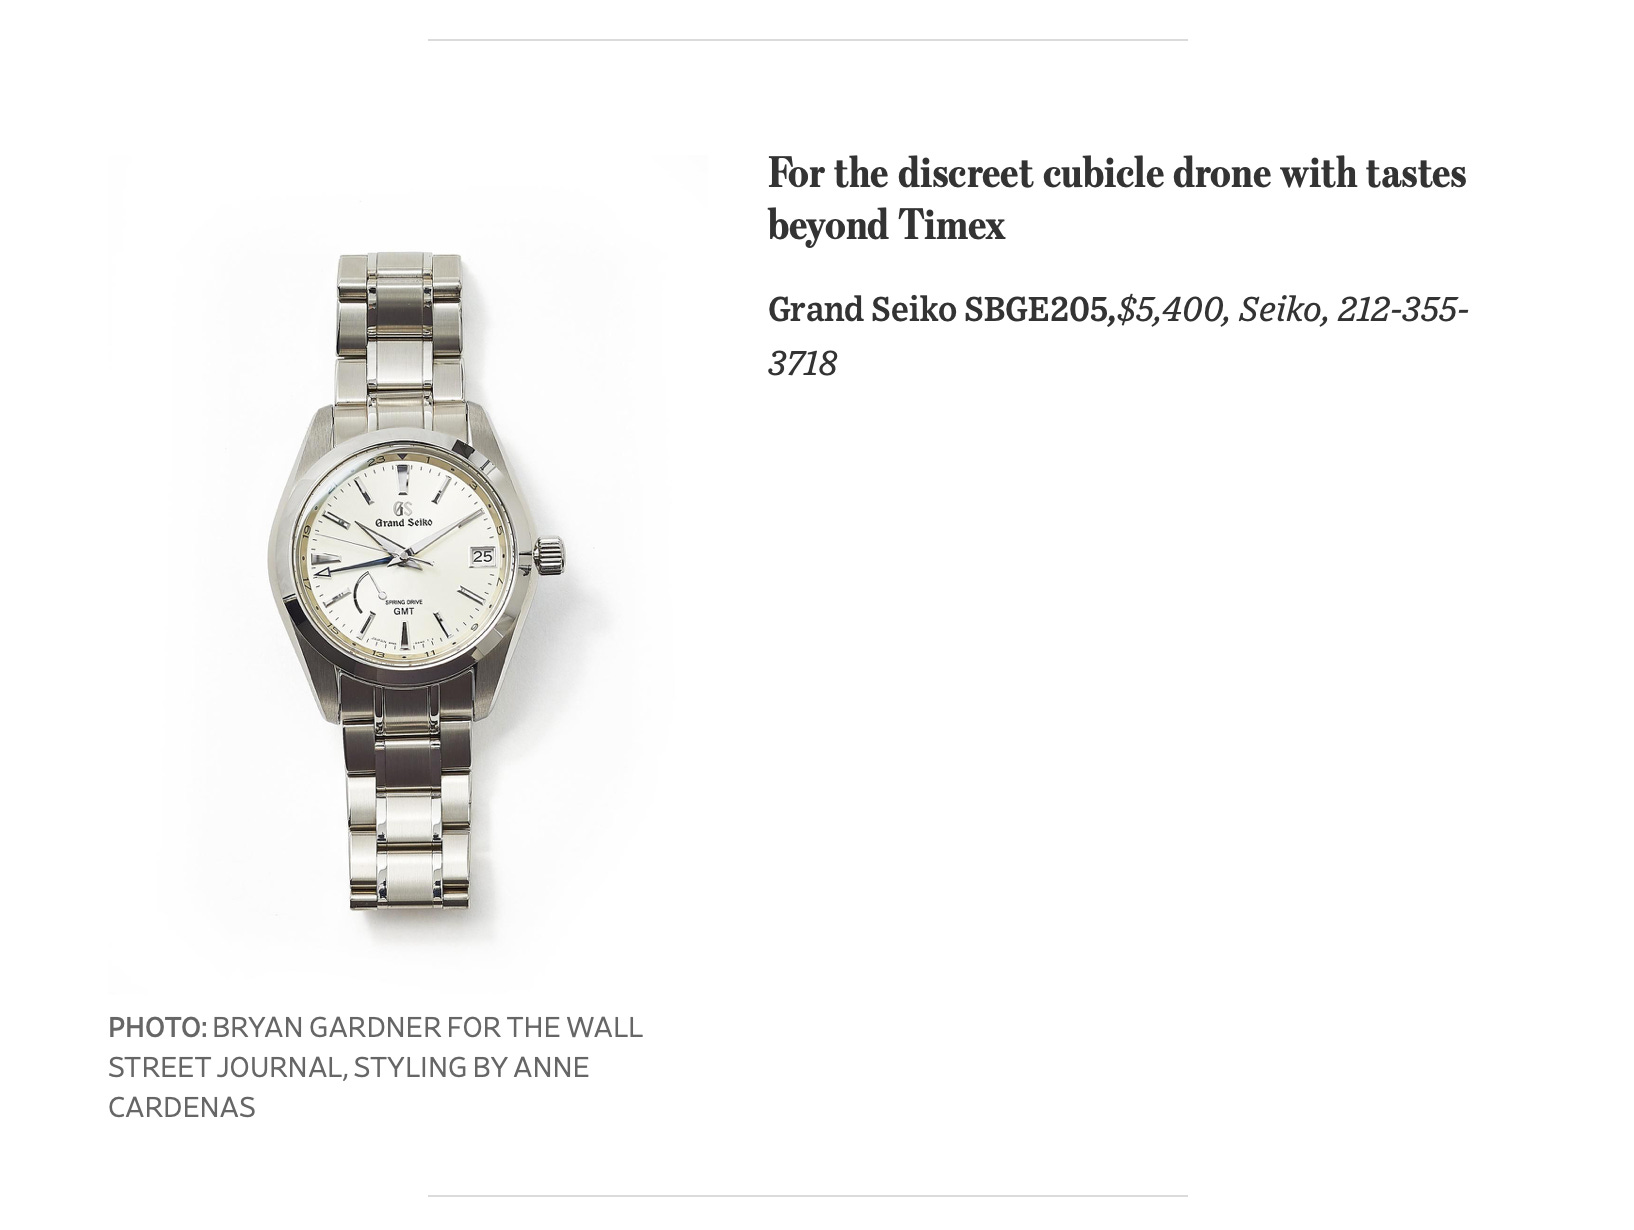 Review: A Grand Seiko Recommended by the Wall Street Journal